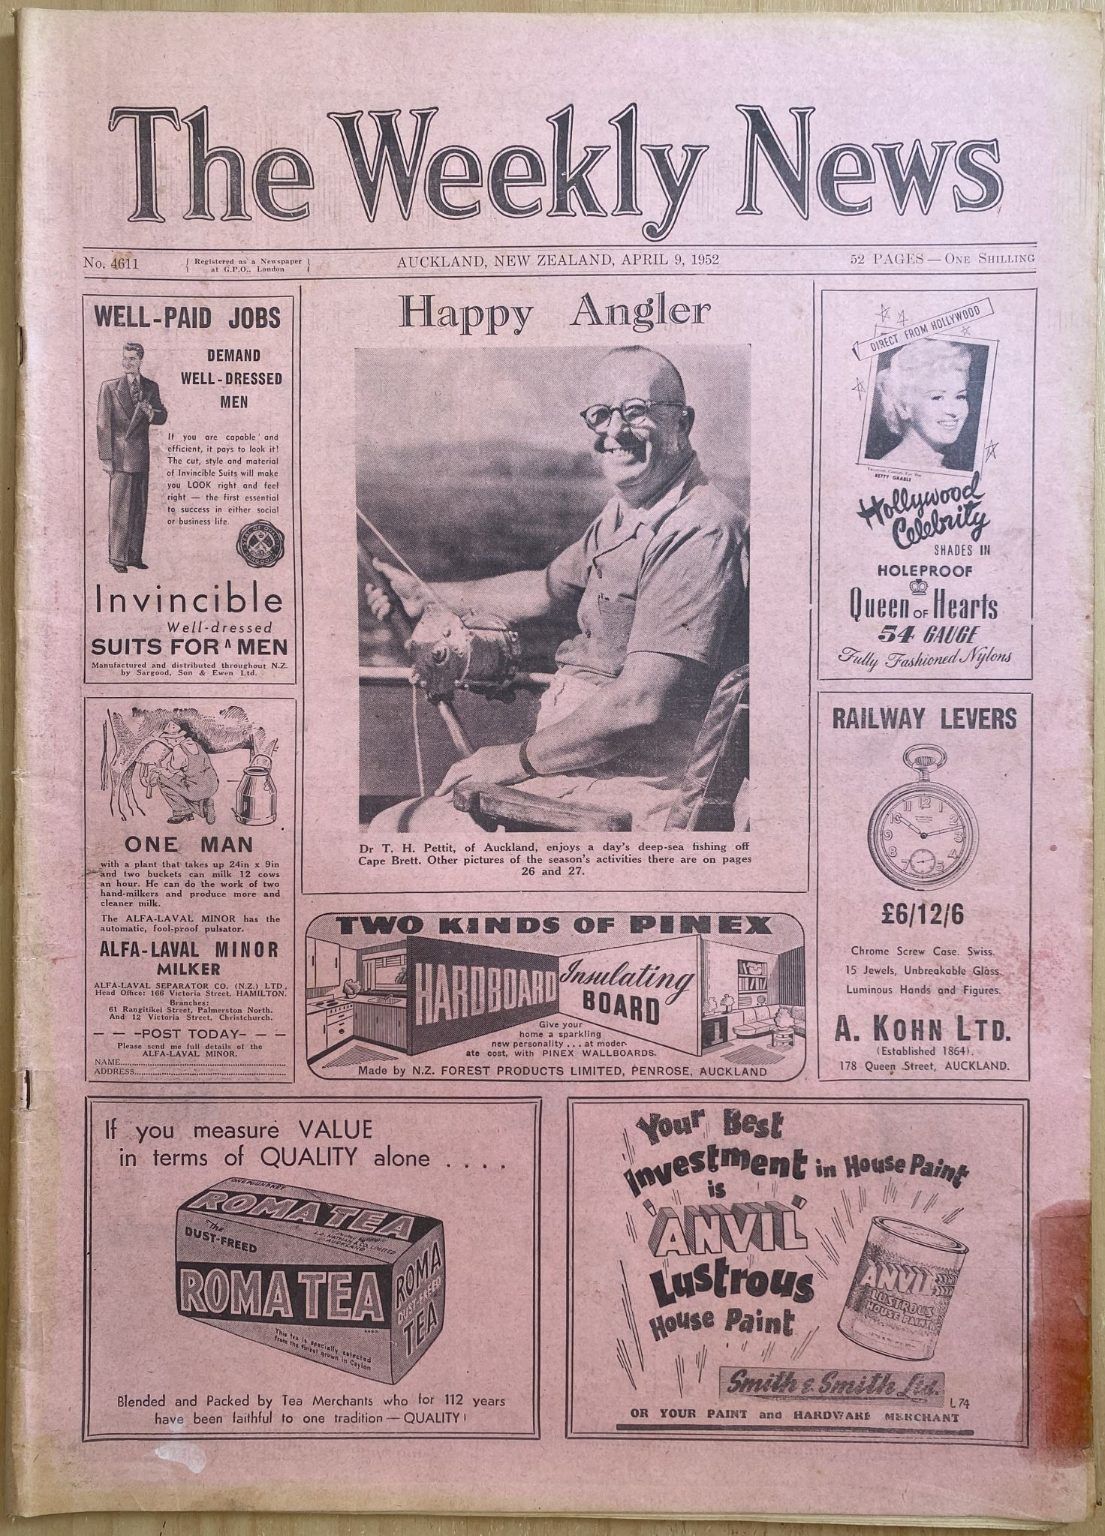 OLD NEWSPAPER: The Weekly News - No. 4611, 9 April 1952